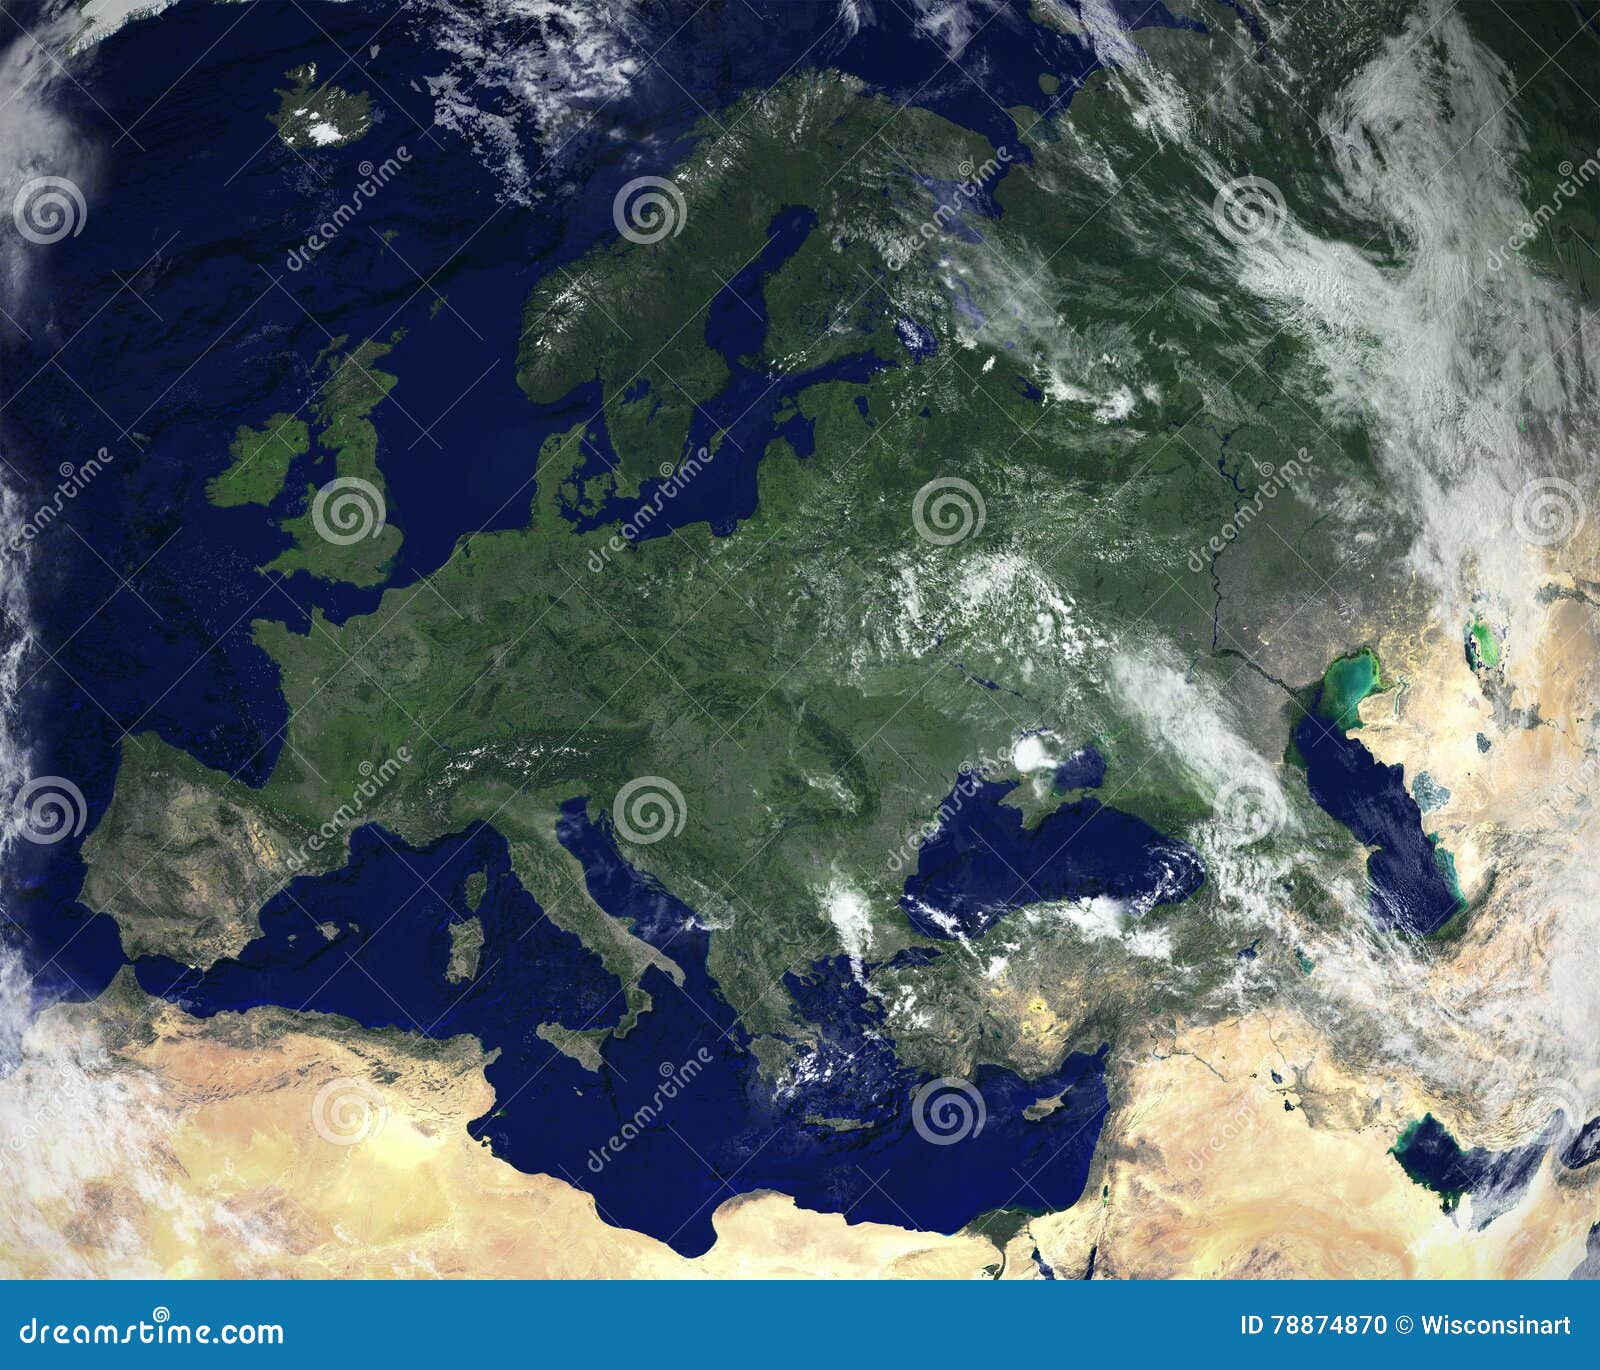 europe continent satellite space view